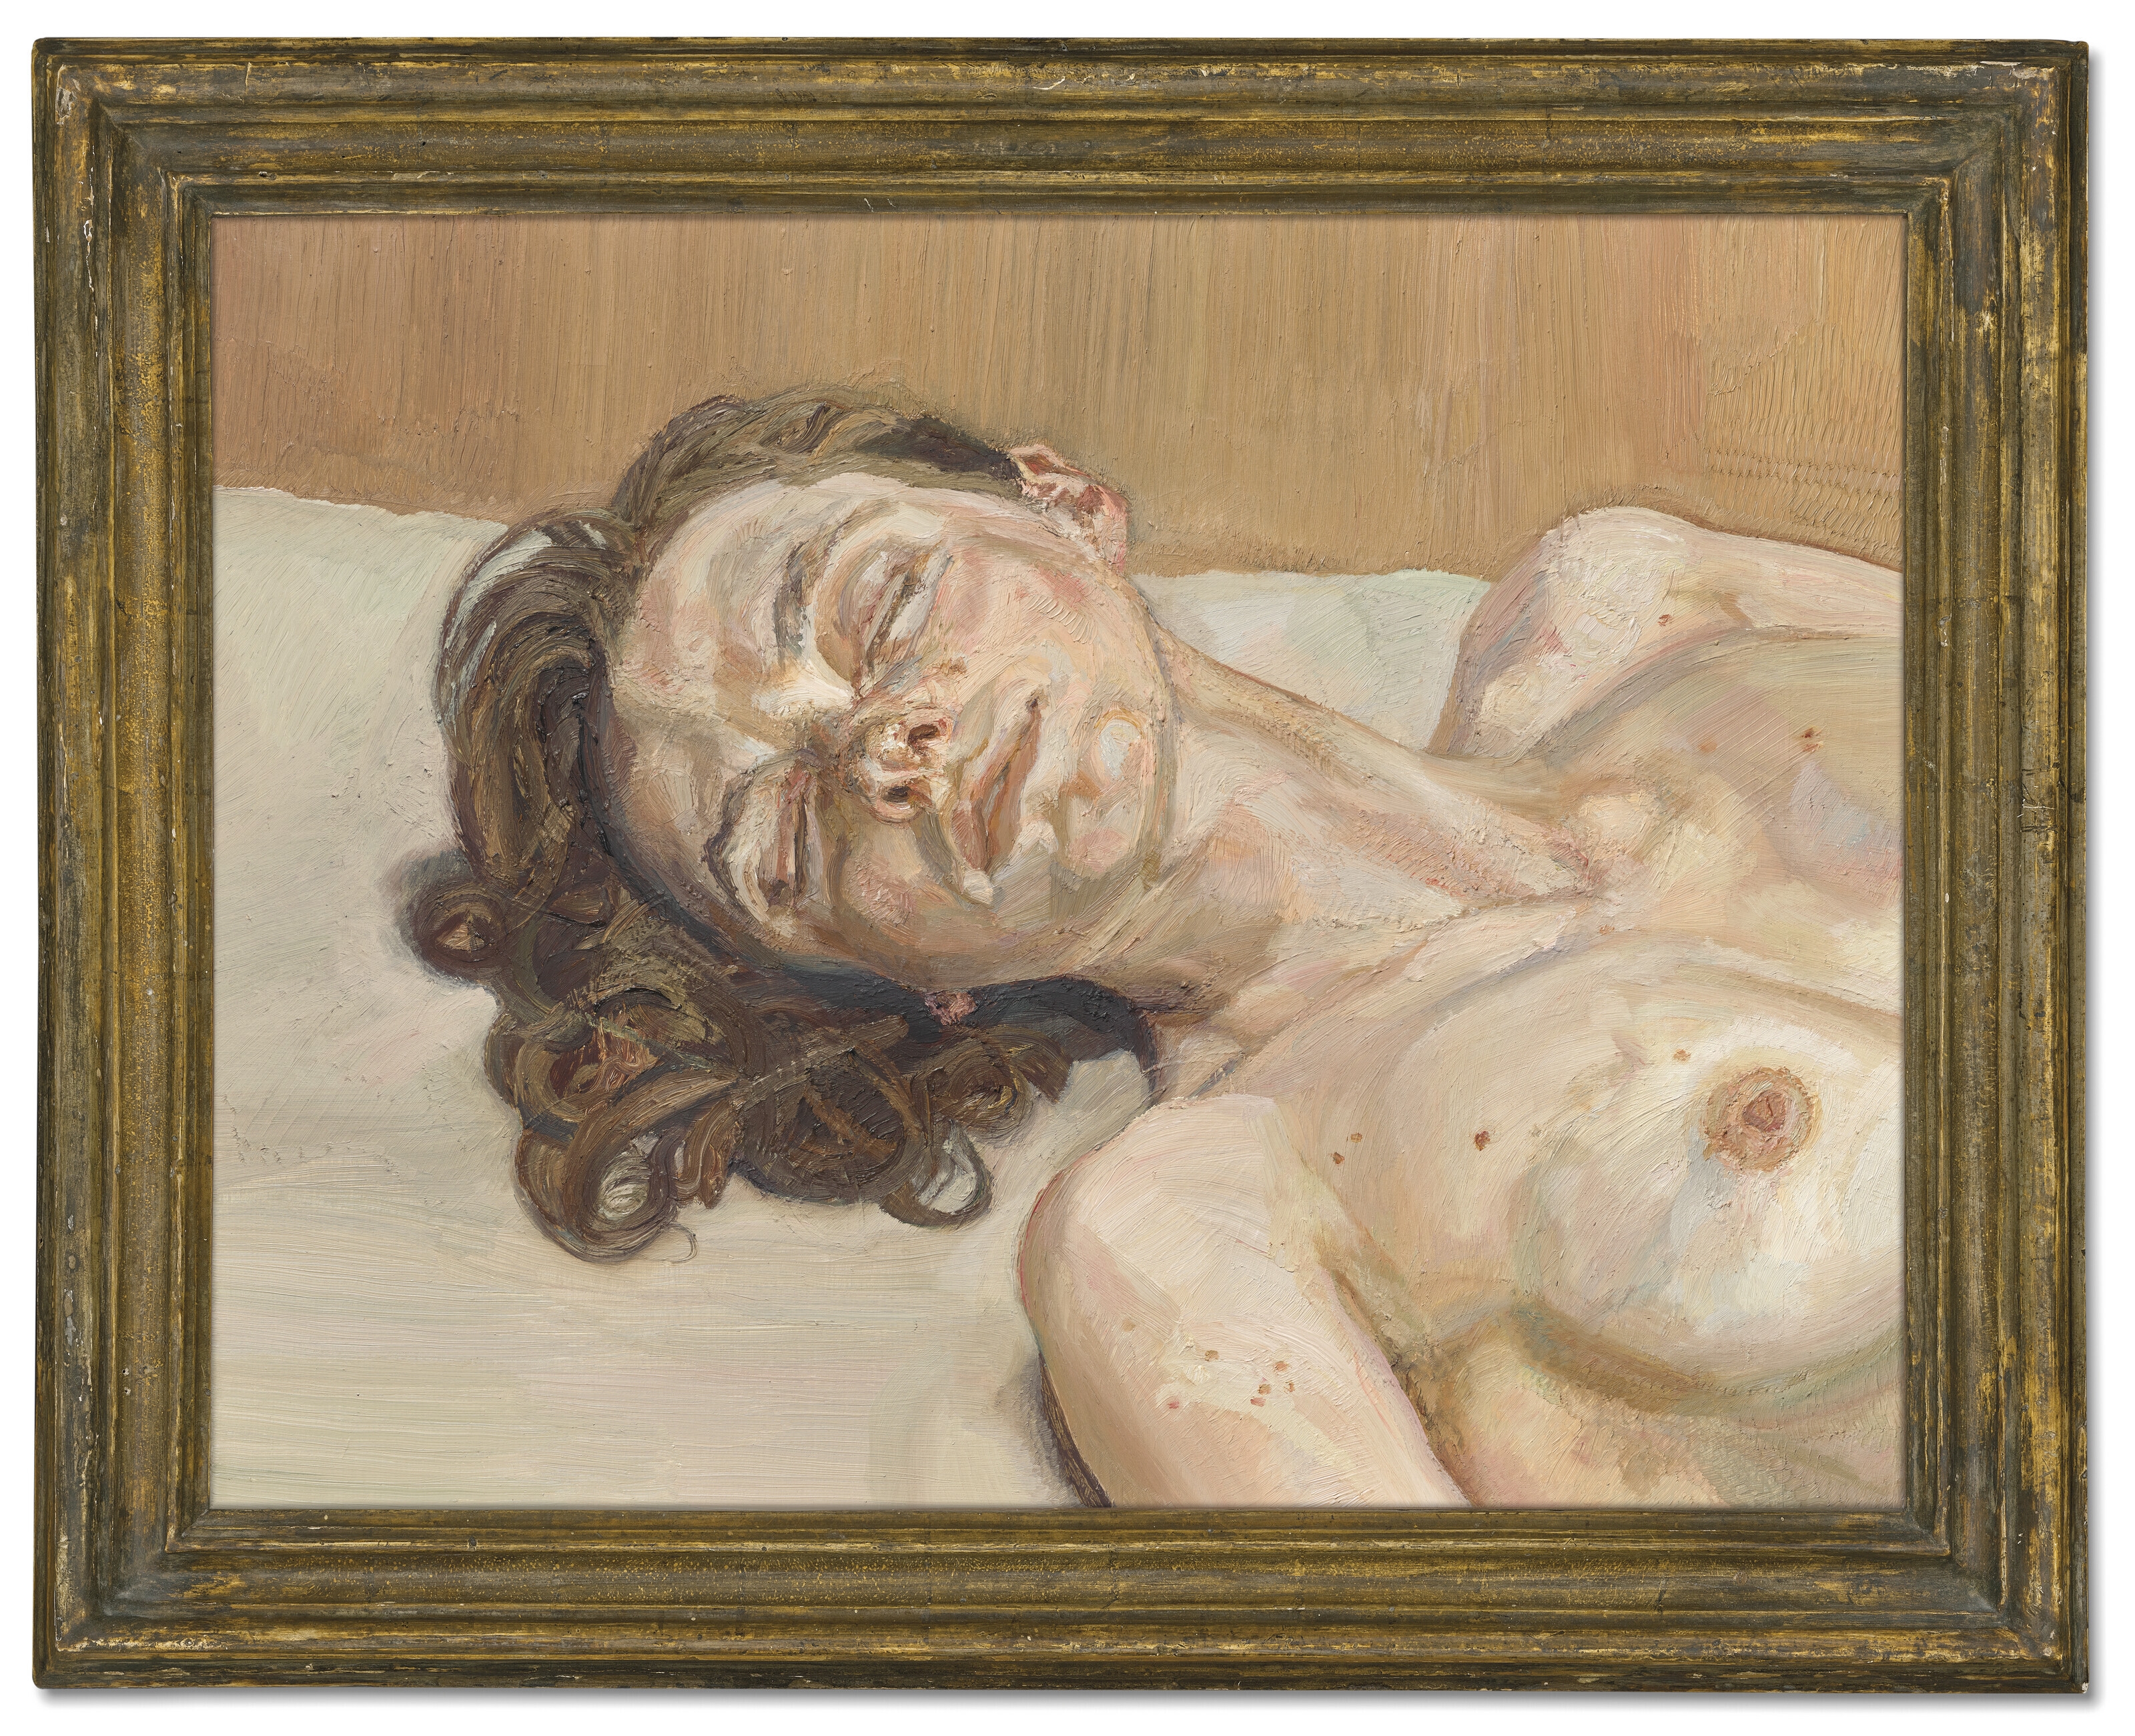 Girl with Closed Eyes by Lucian Freud, Painted in 1986-1987